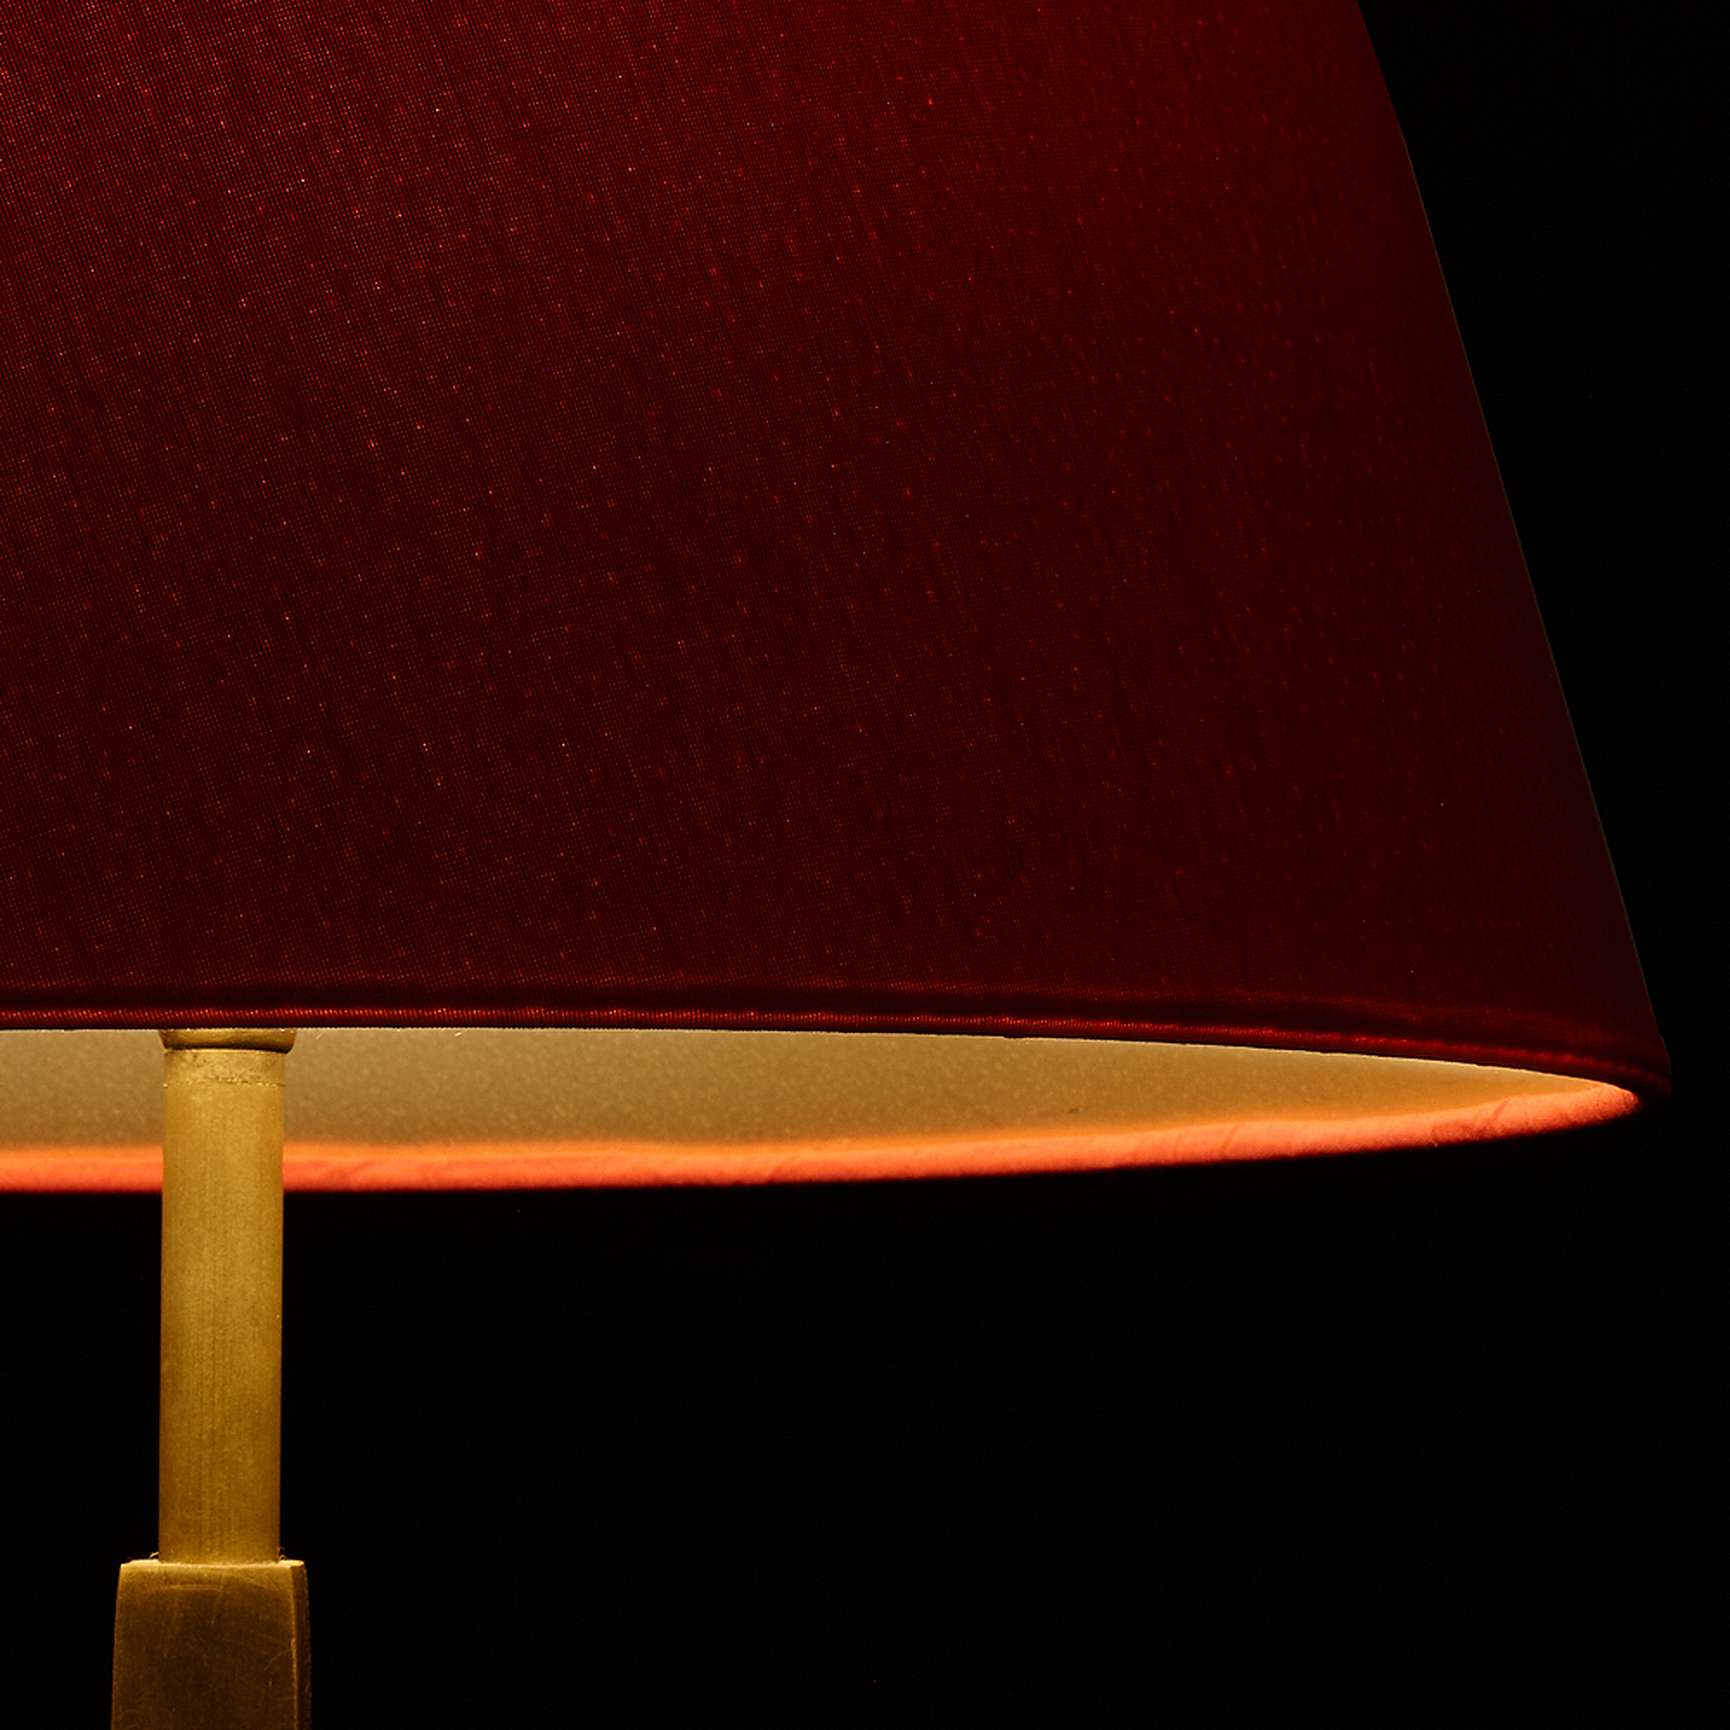 35cm Straight Empire shade in red silk with Glasgow gold interior